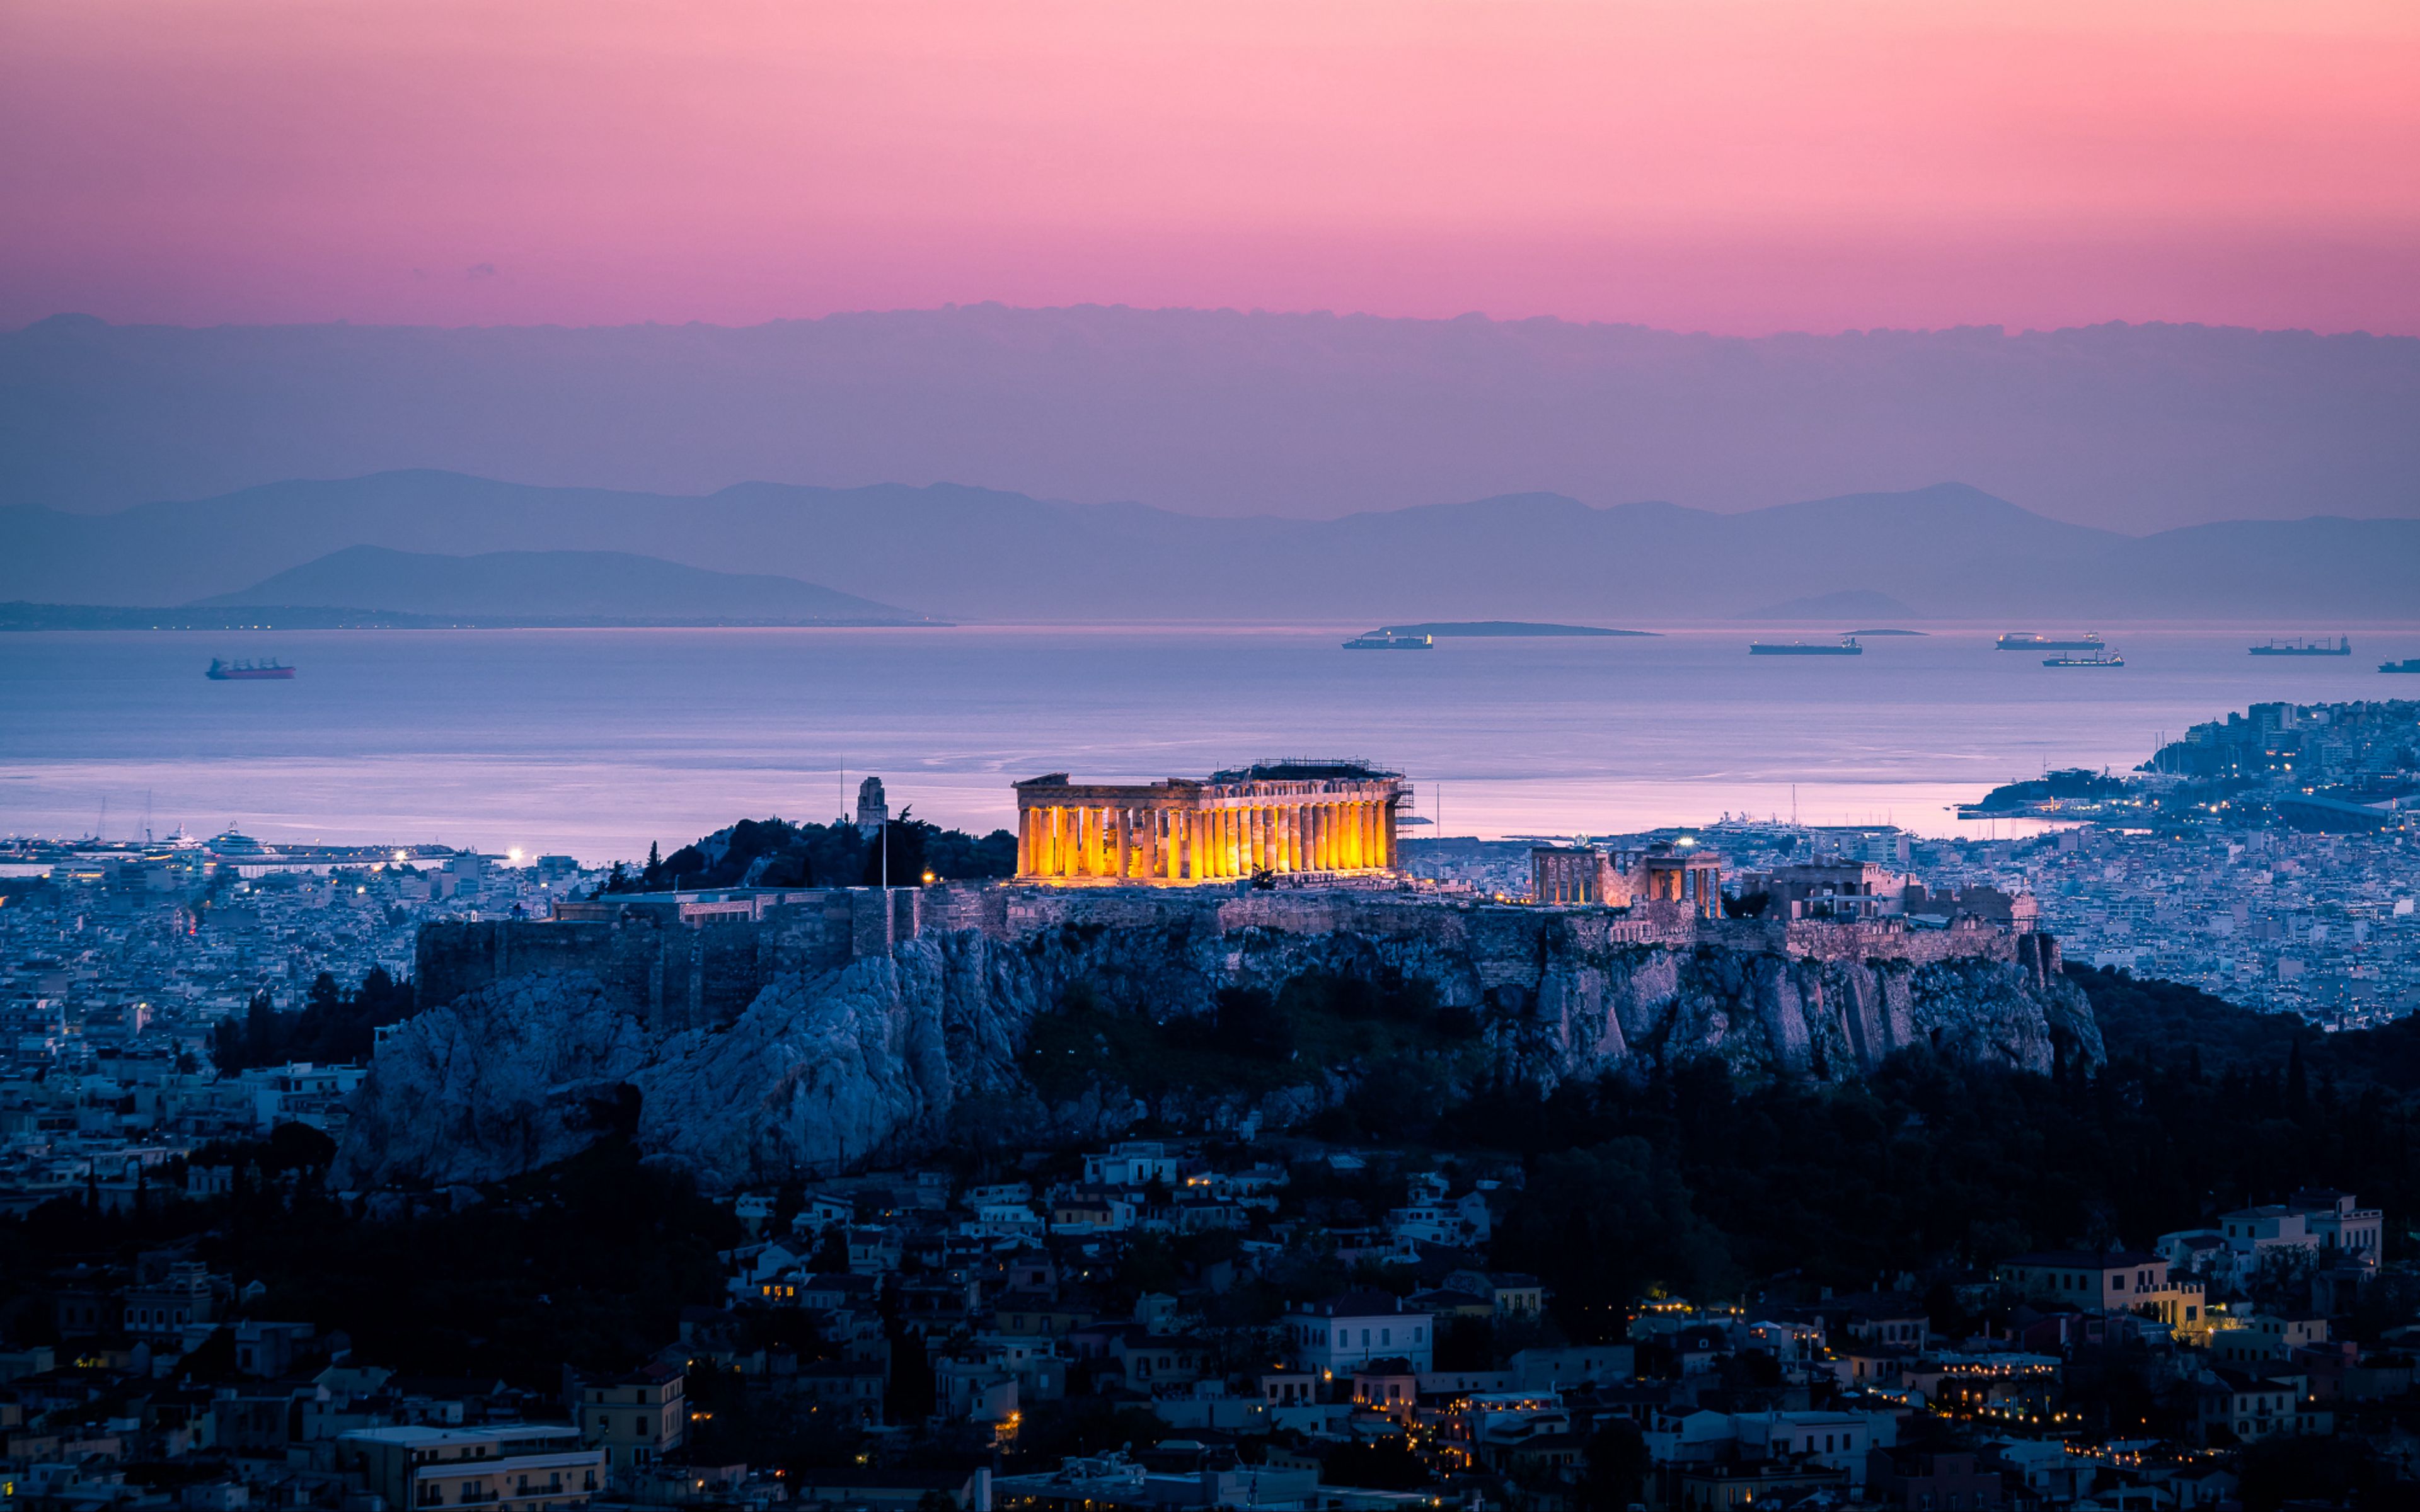 Download wallpaper 3840x2400 architecture, sunset, sea, acropolis, athens, greece 4k ultra HD 16:10 HD background